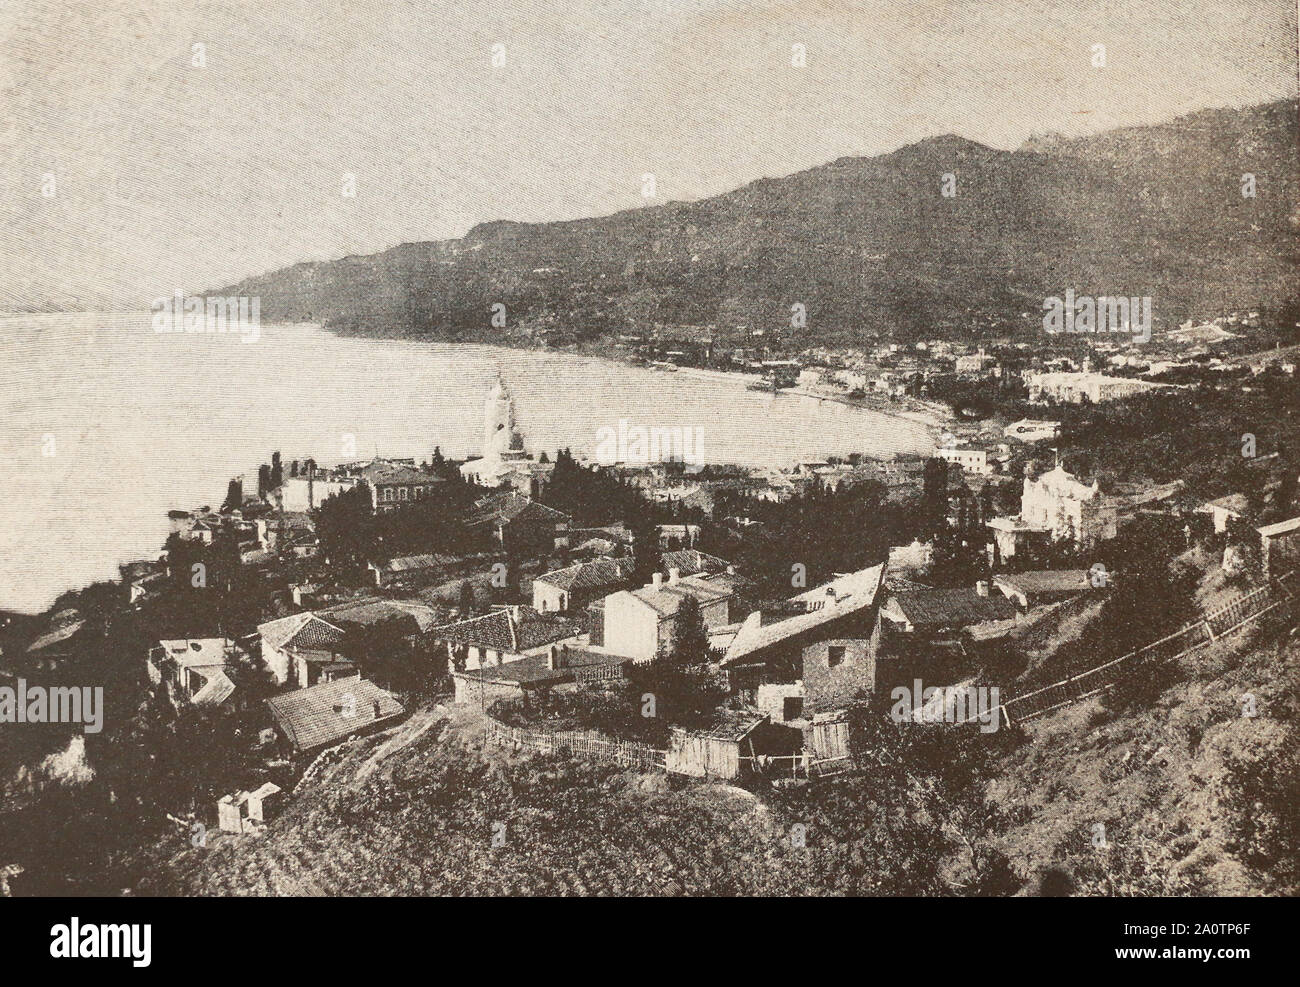 General view of Yalta (Crimea) in the 19th century. Stock Photo